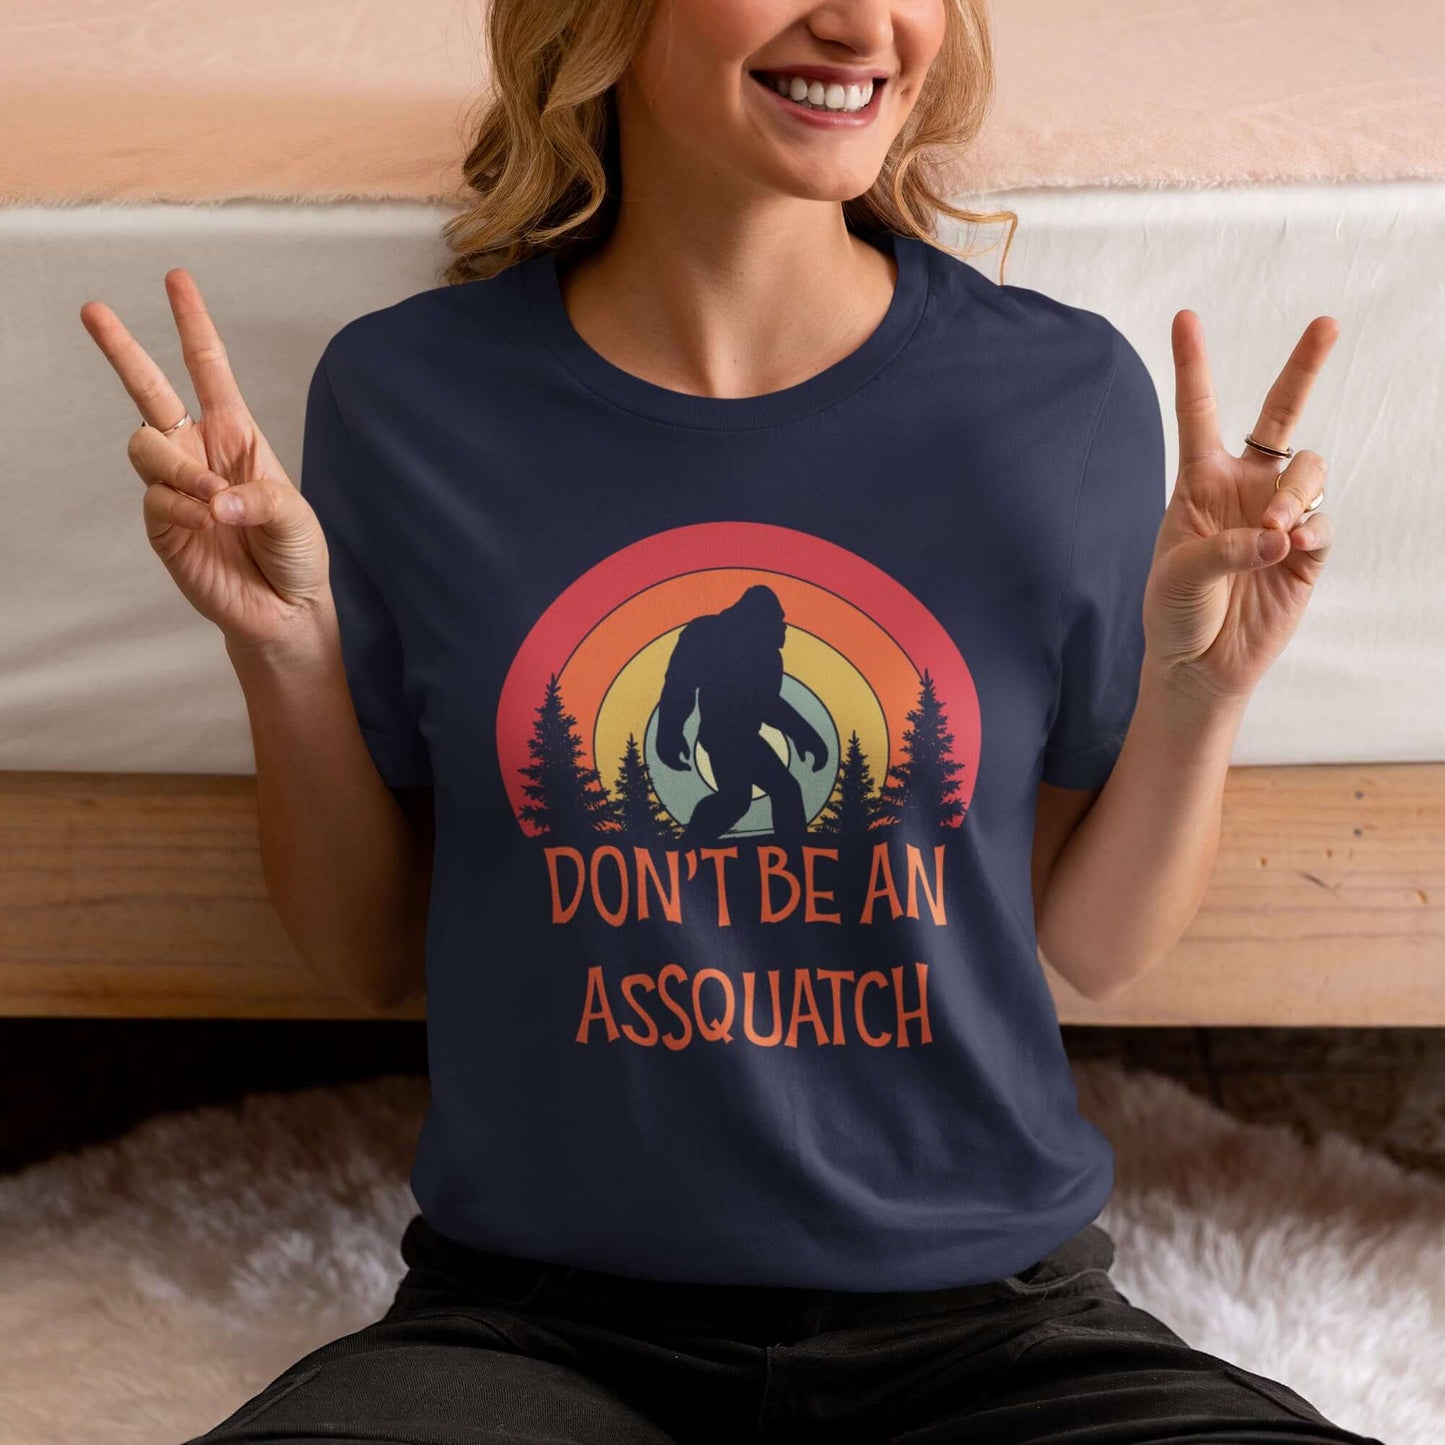 Woman wearing navy blue t-shirt with sasquatch graphic and the words don't be an assquatch printed on the front.